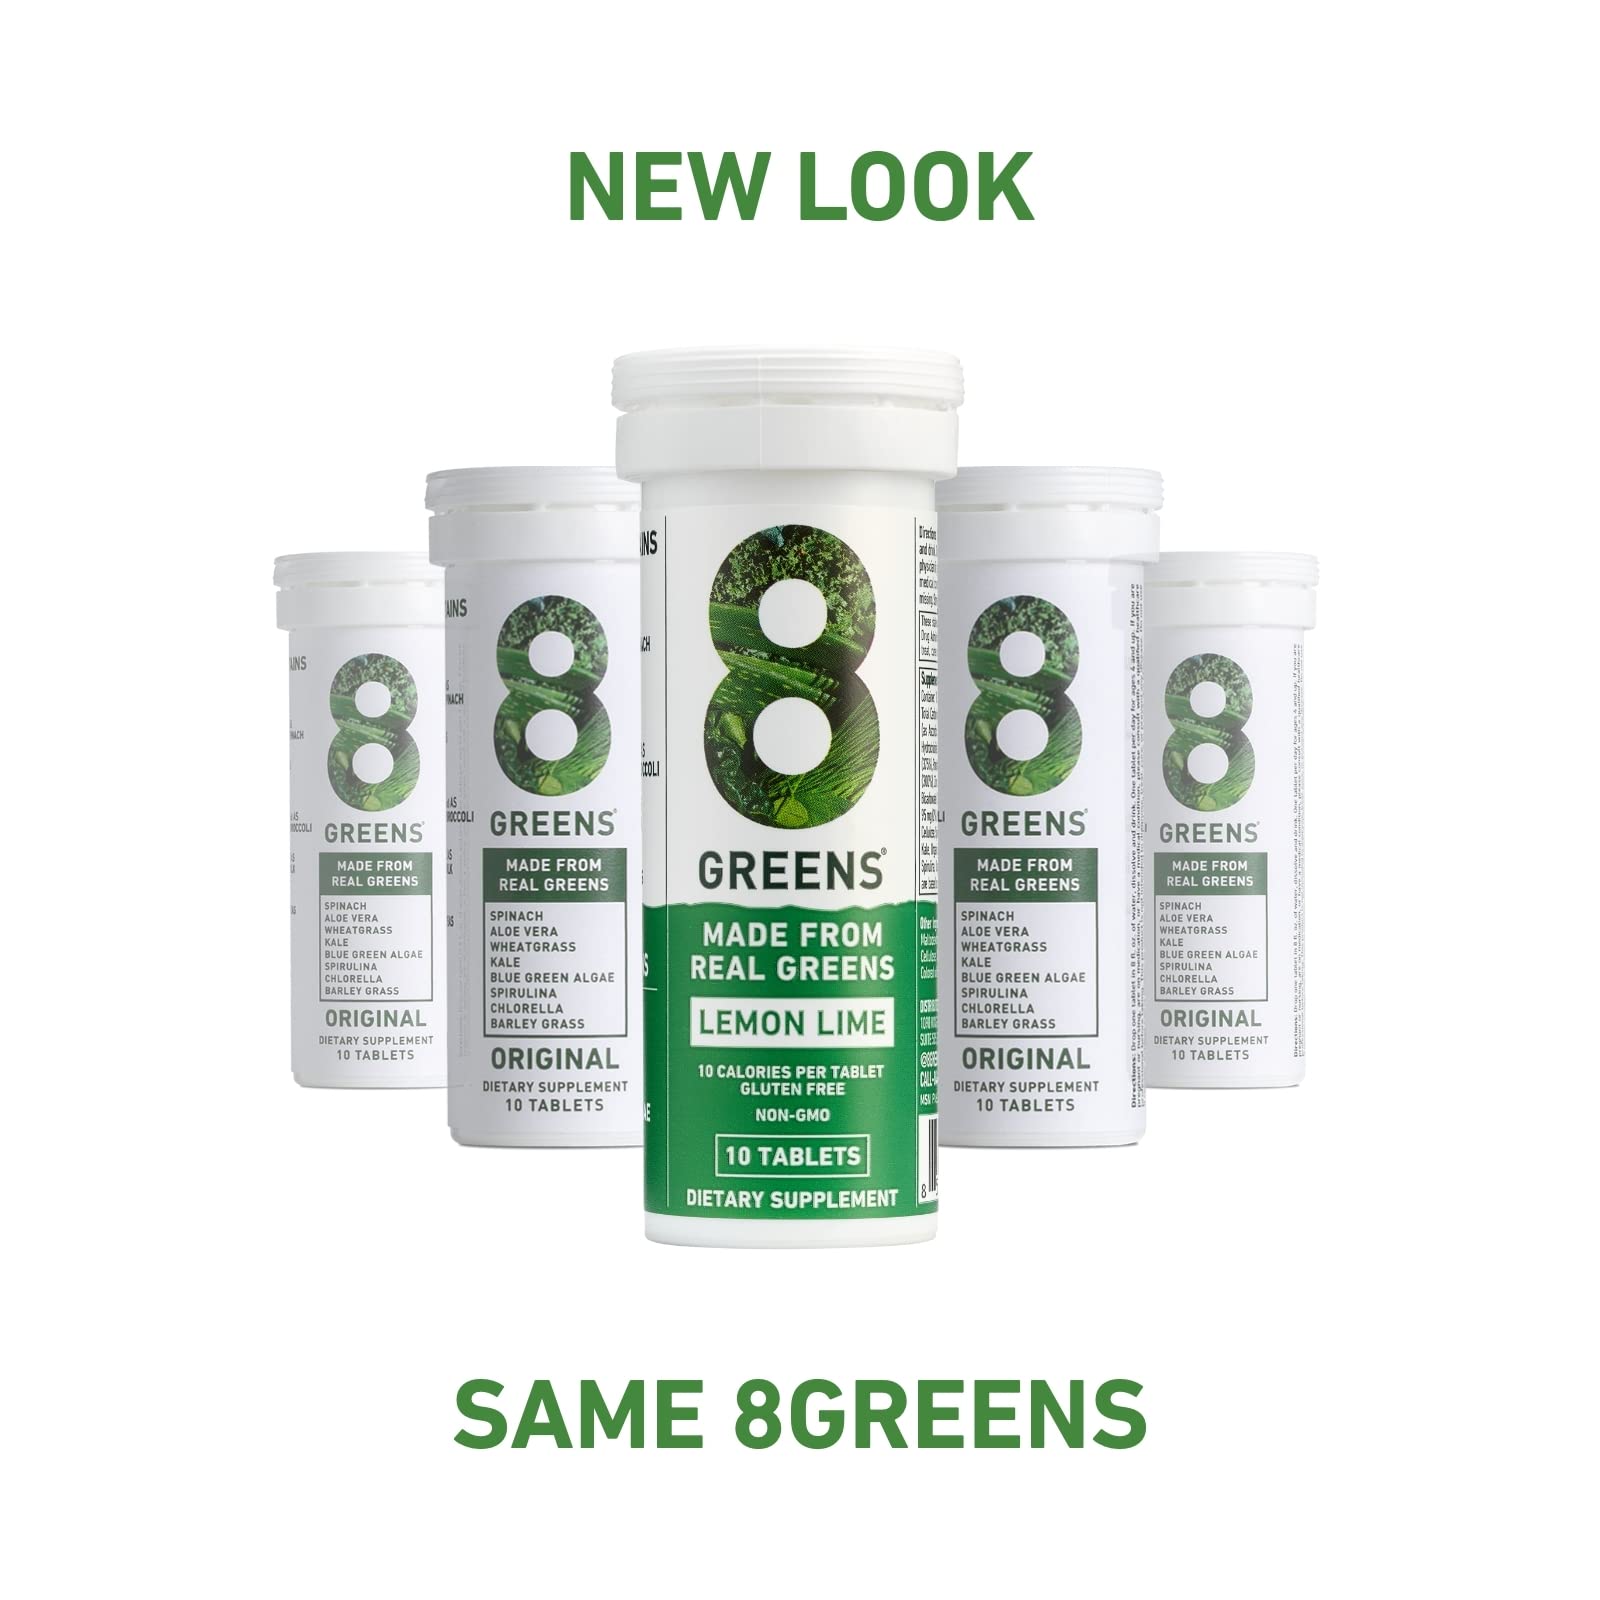 8Greens - Daily Superfood, Greens Powder, Super Greens, Vitamins, Vegan, Gluten Free, Non-GMO for Immune Support, Energy & Gut Support (3 Tubes, 30 Tablets)